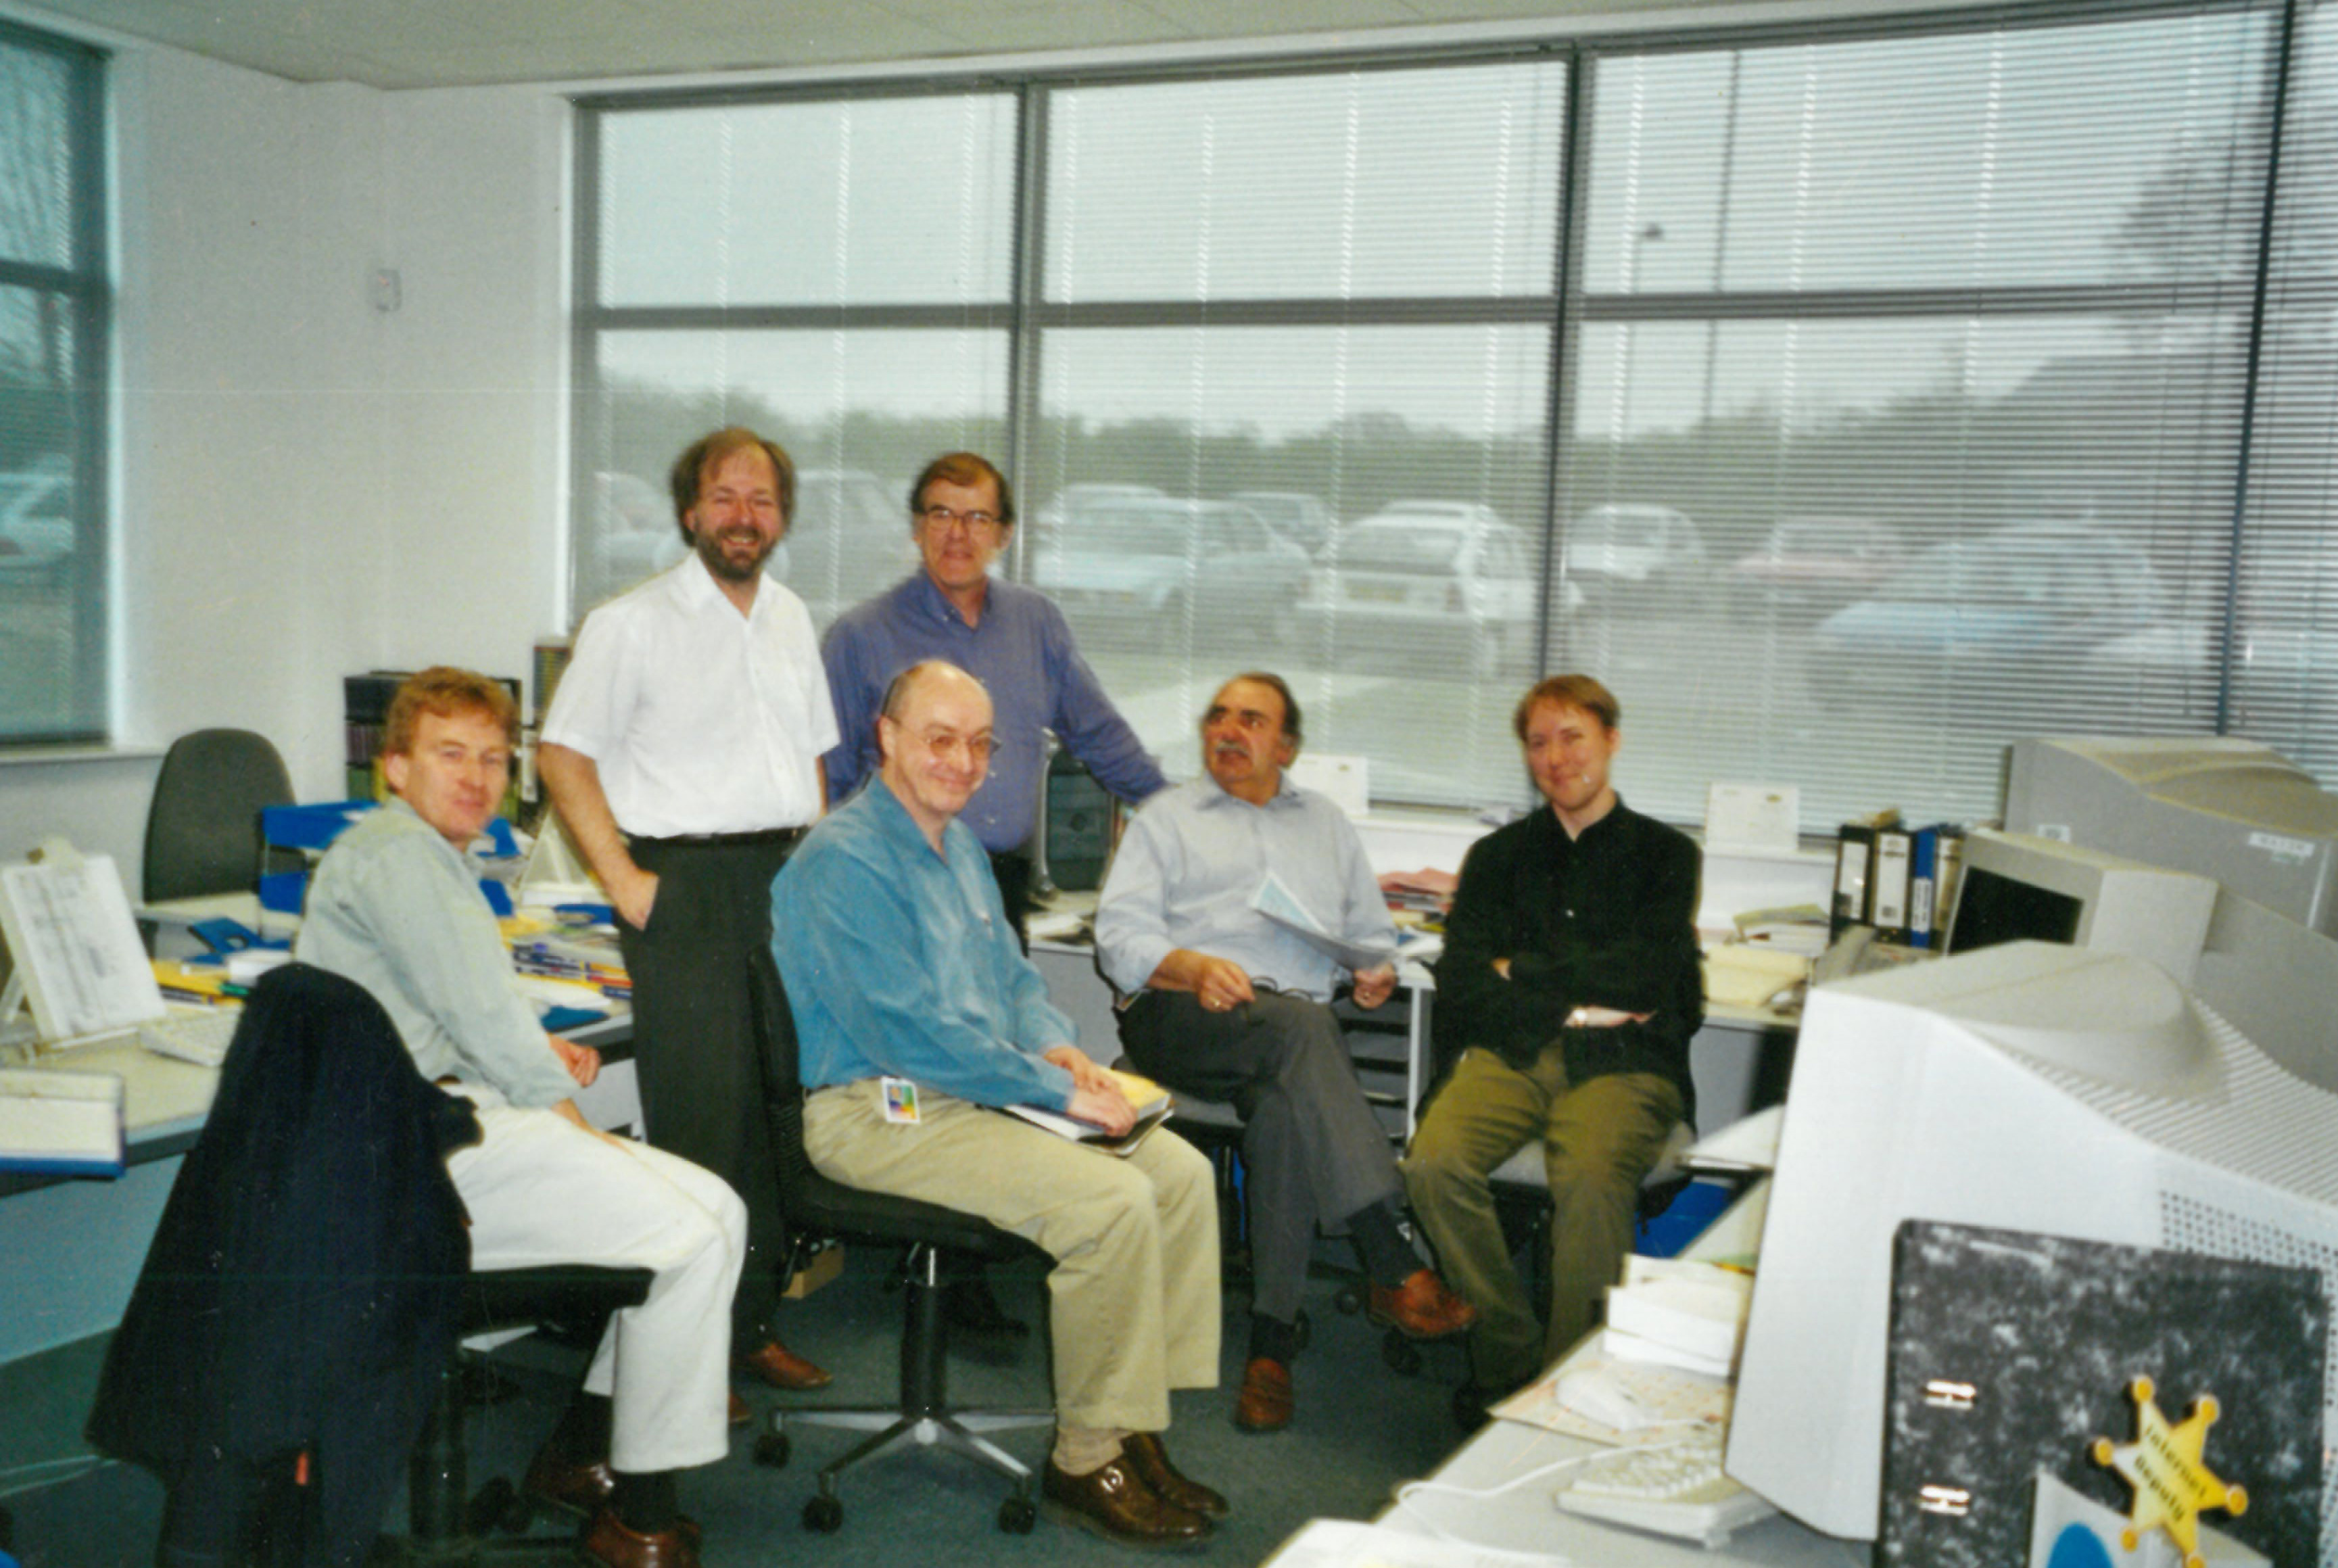 John Blanchard, 2nd from left (standing), with the Catalogue Production team in 2000.